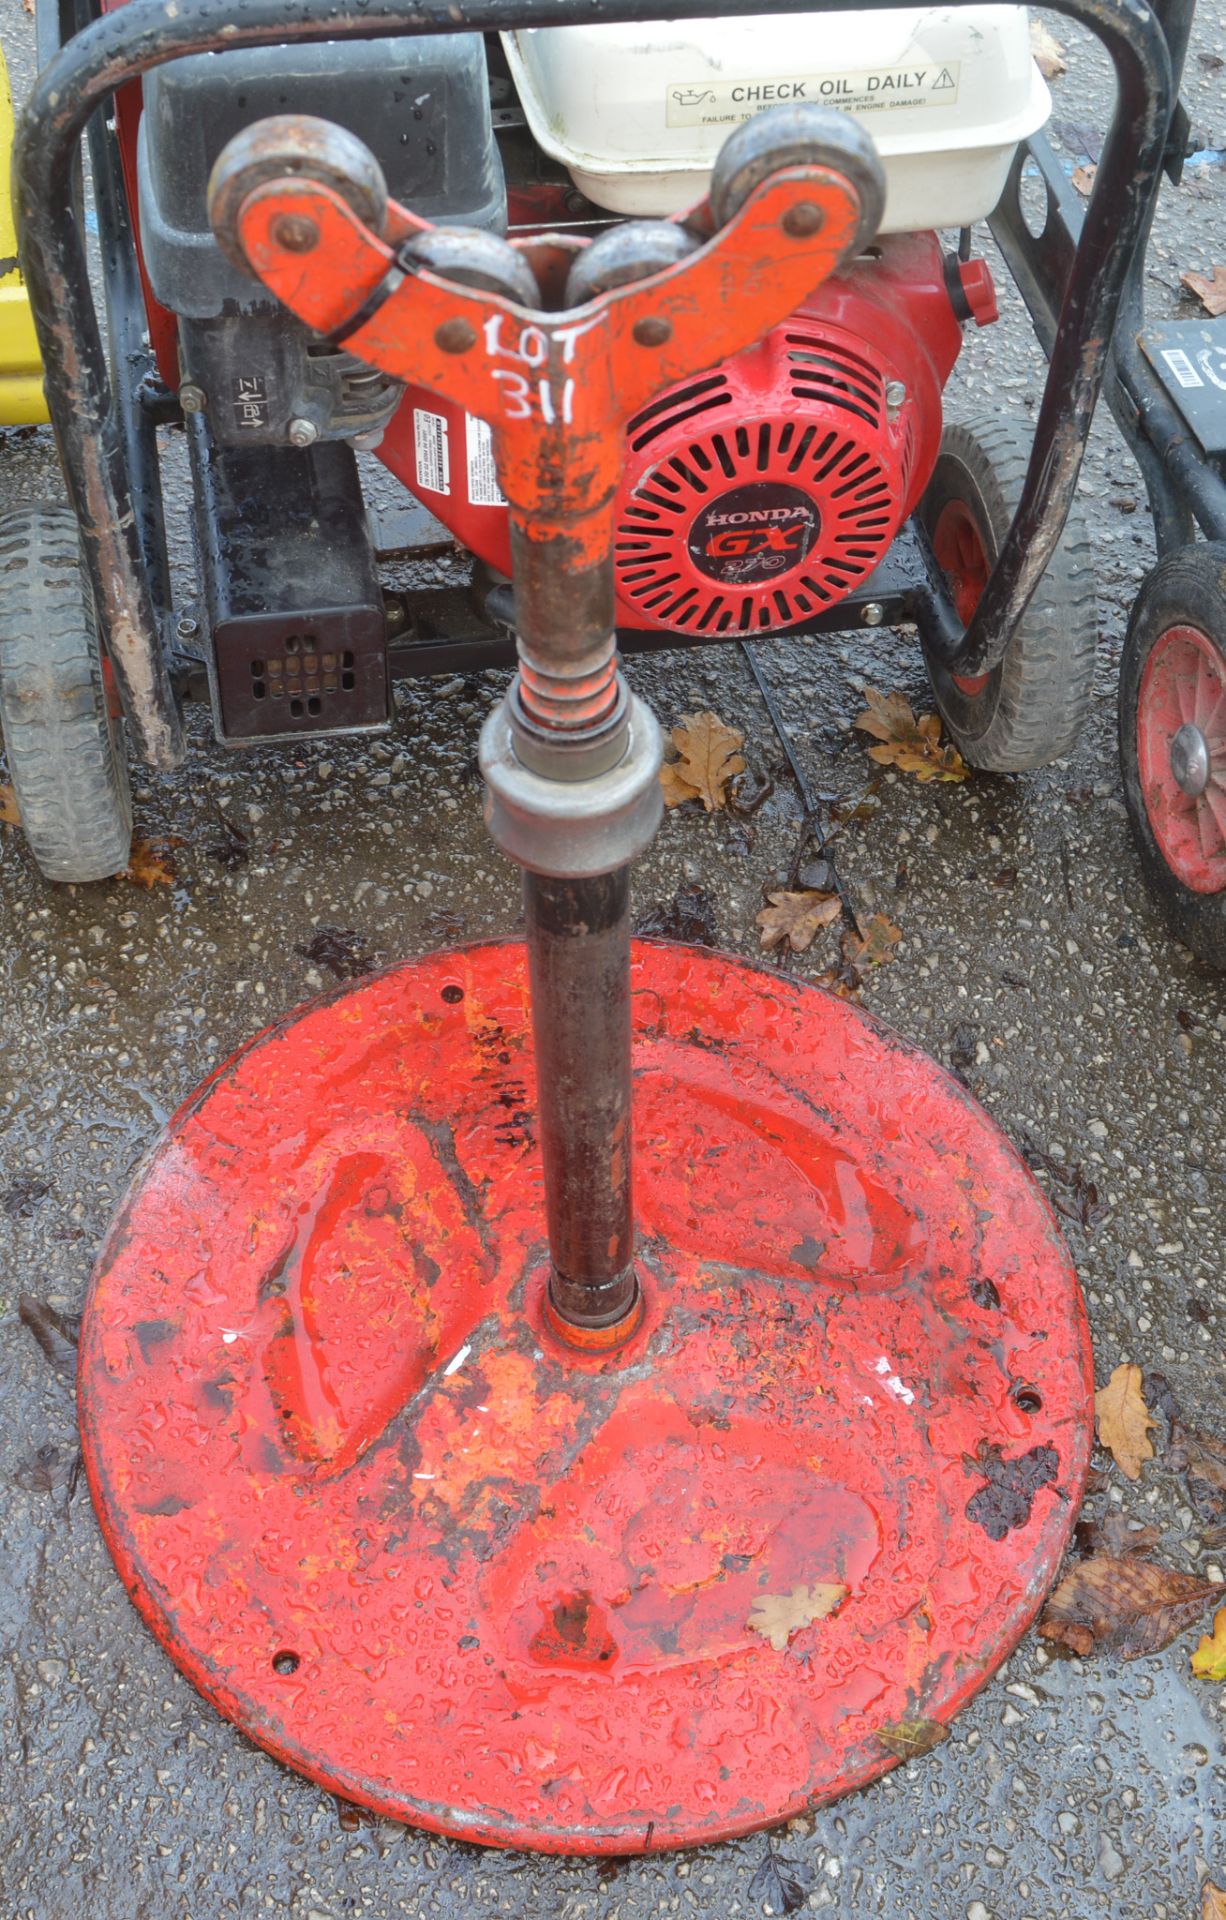 Pipe roller stand